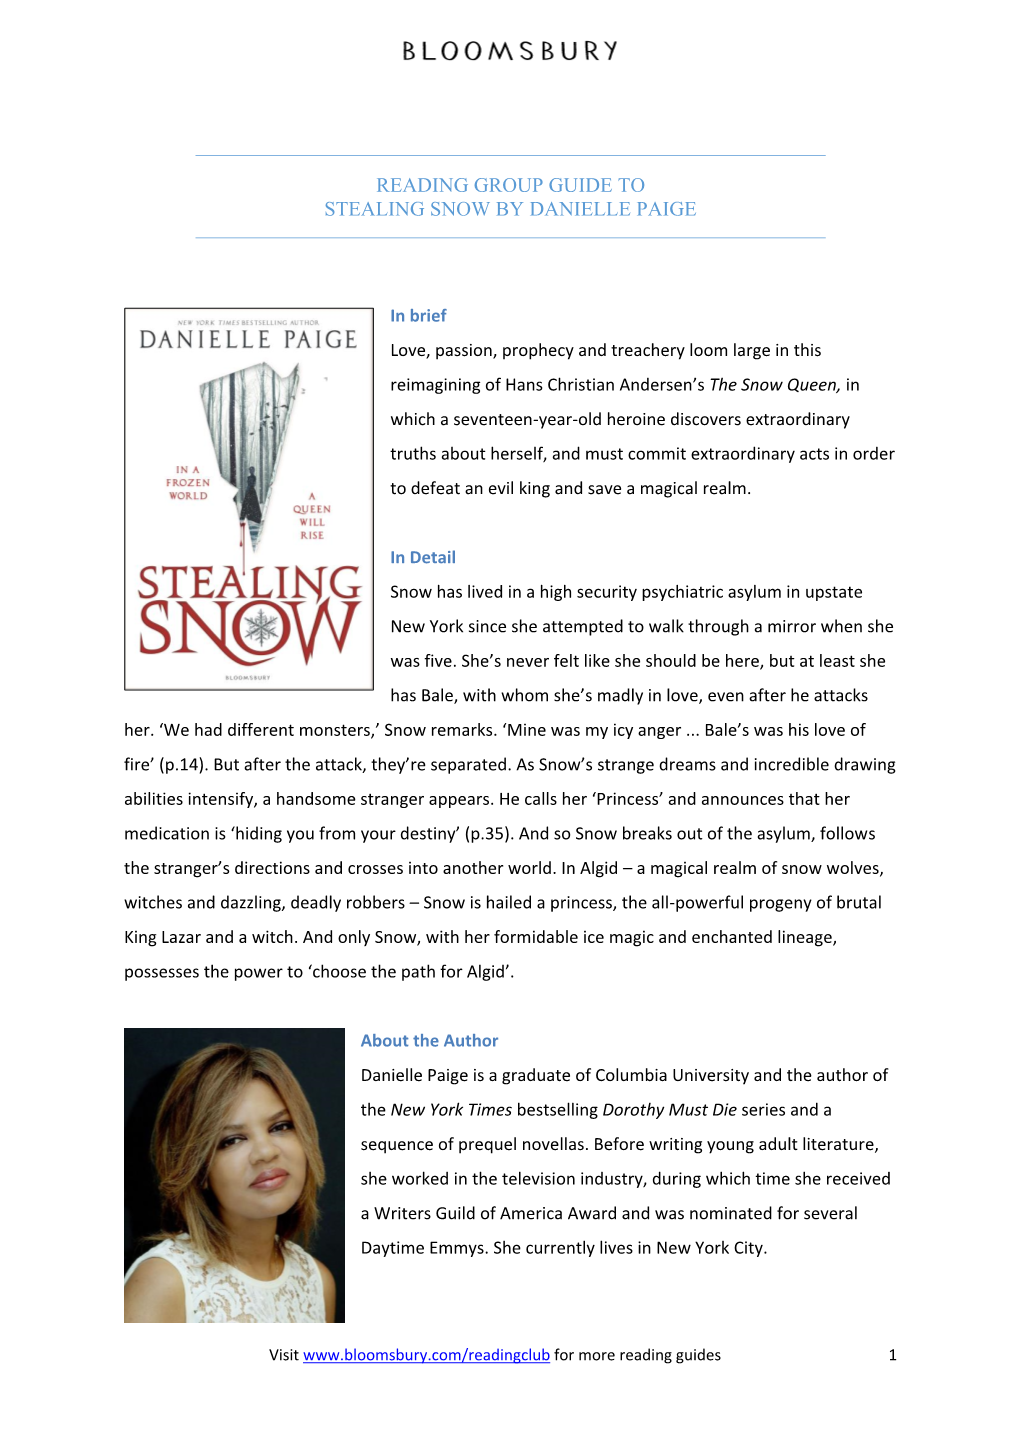 Reading Group Guide to Stealing Snow by Danielle Paige